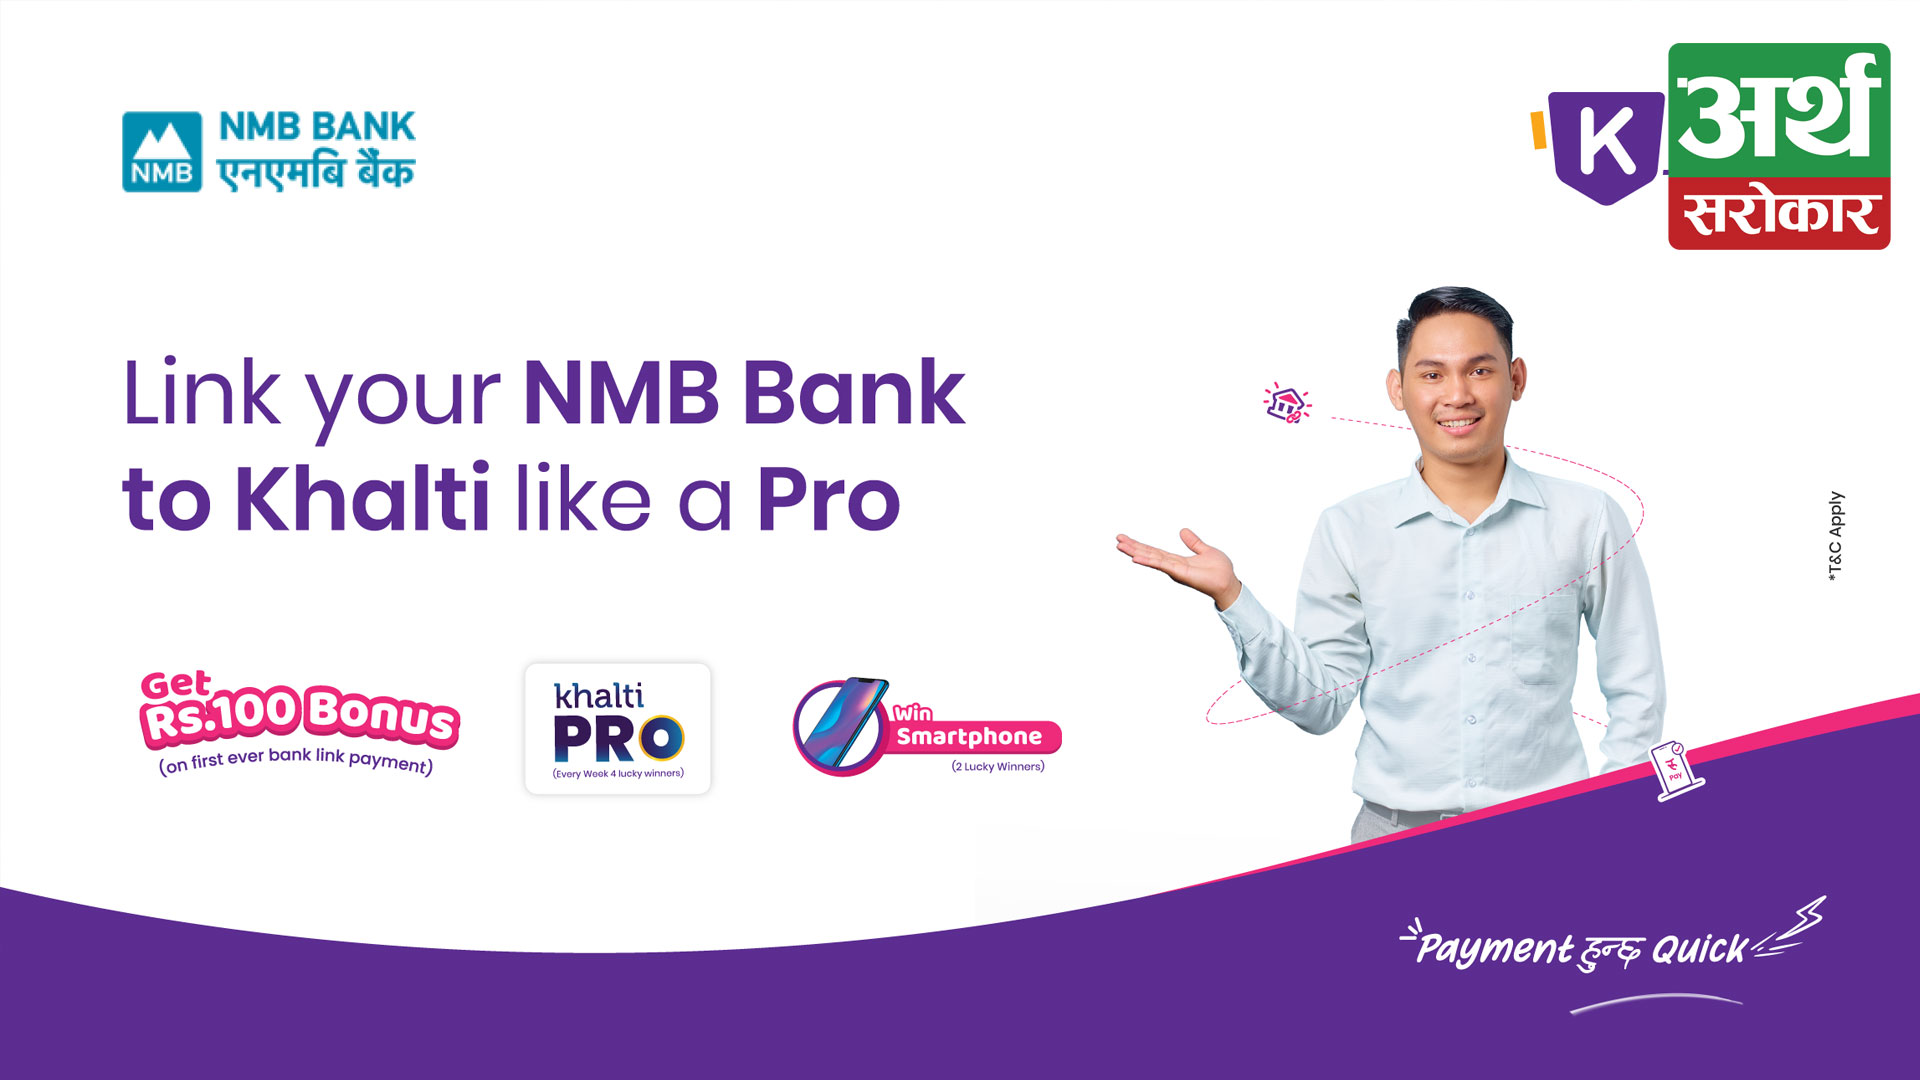 Link NMB Bank Account  Khalti ID exclusively: Get instant Rs. 100 Bonus and win Smartphone